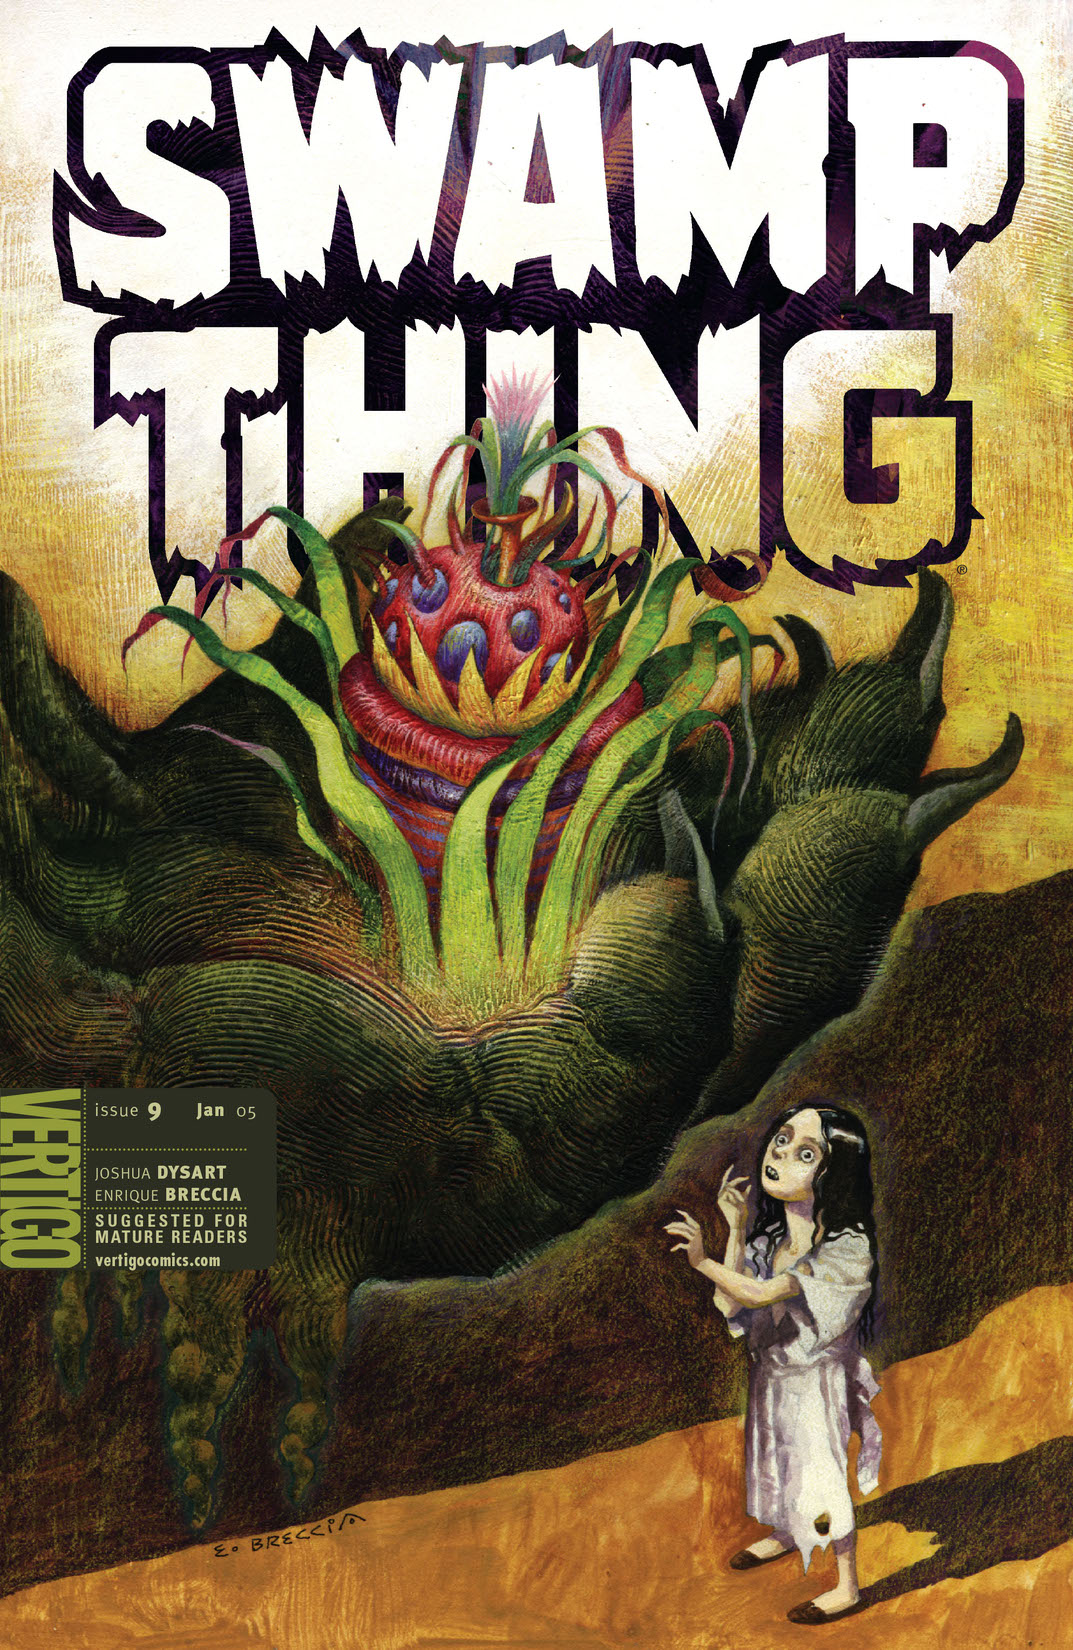 Swamp Thing (2004-) #9 preview images